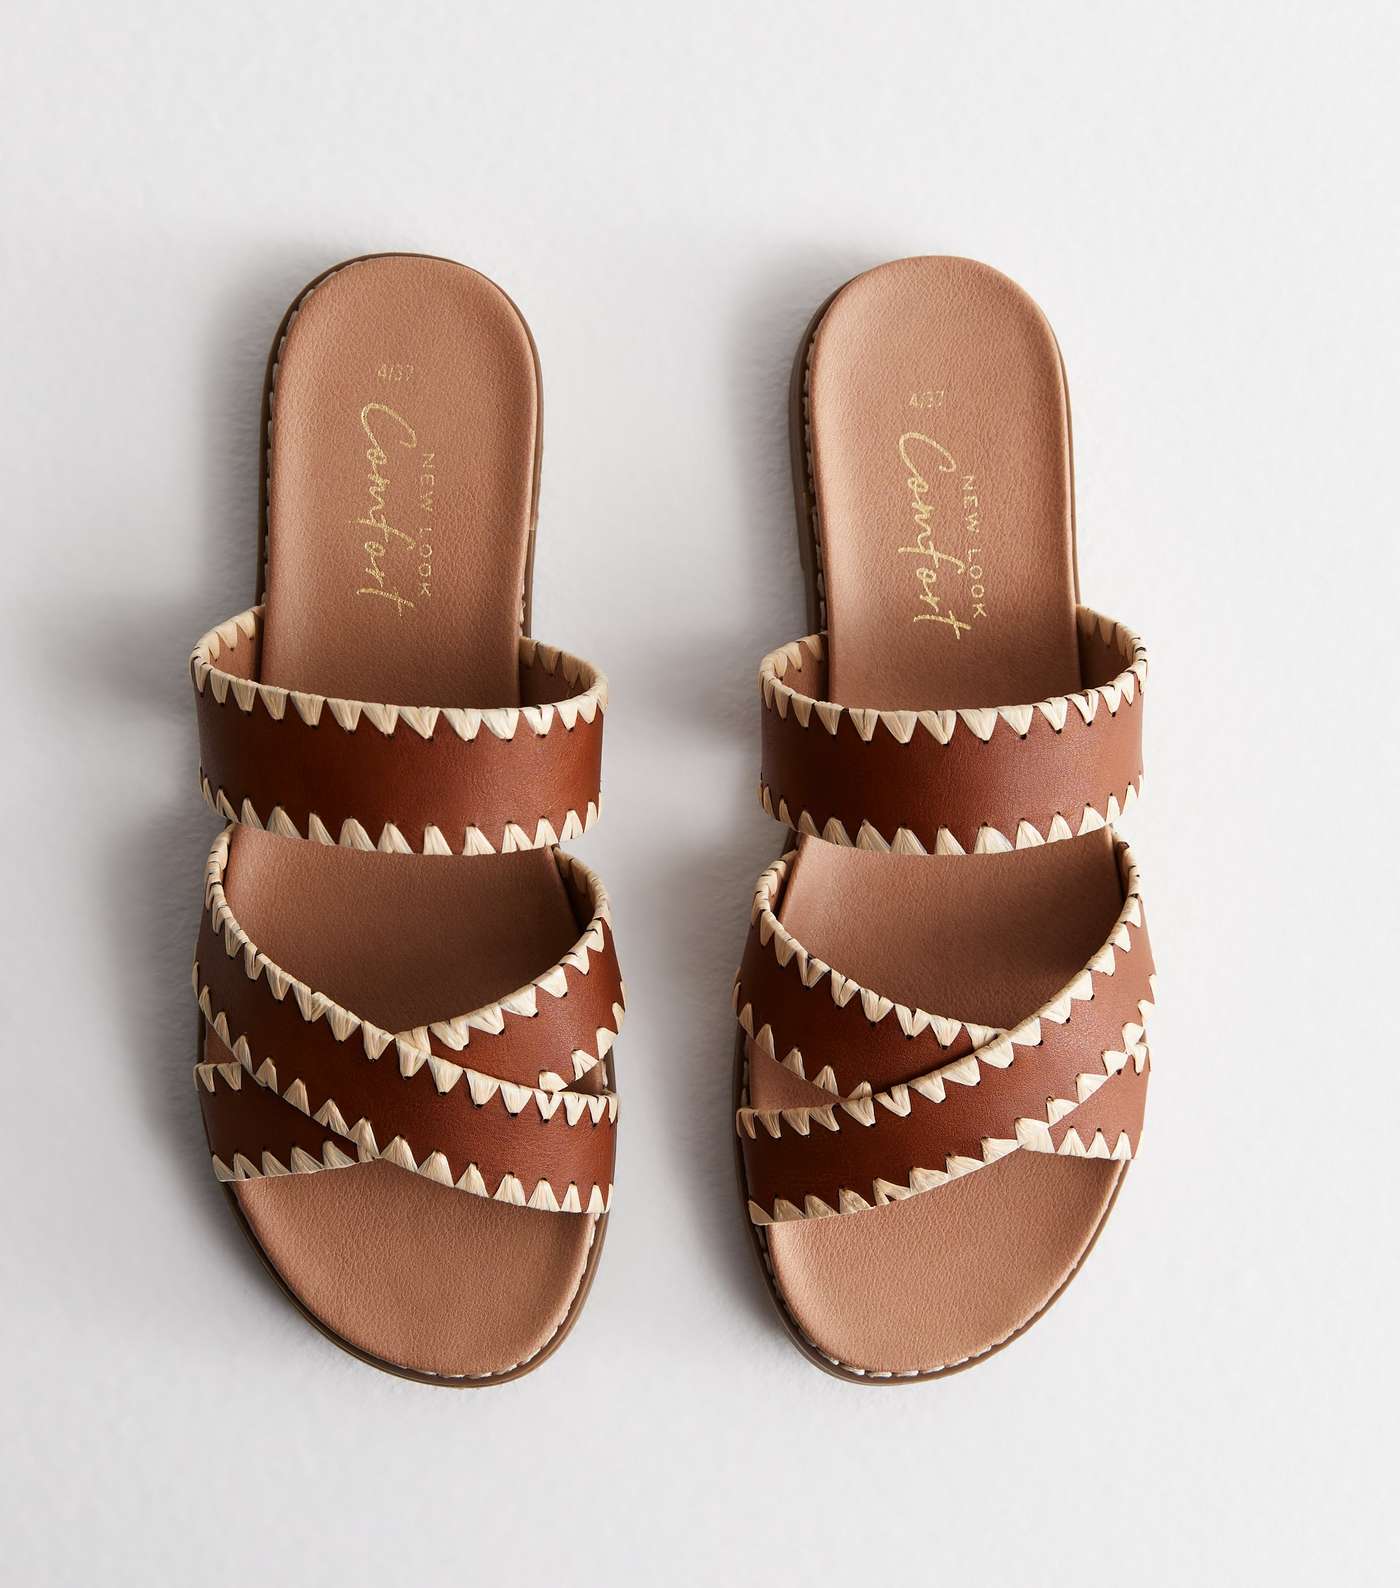 Tan Leather-Look Stitch Cross Over Sliders